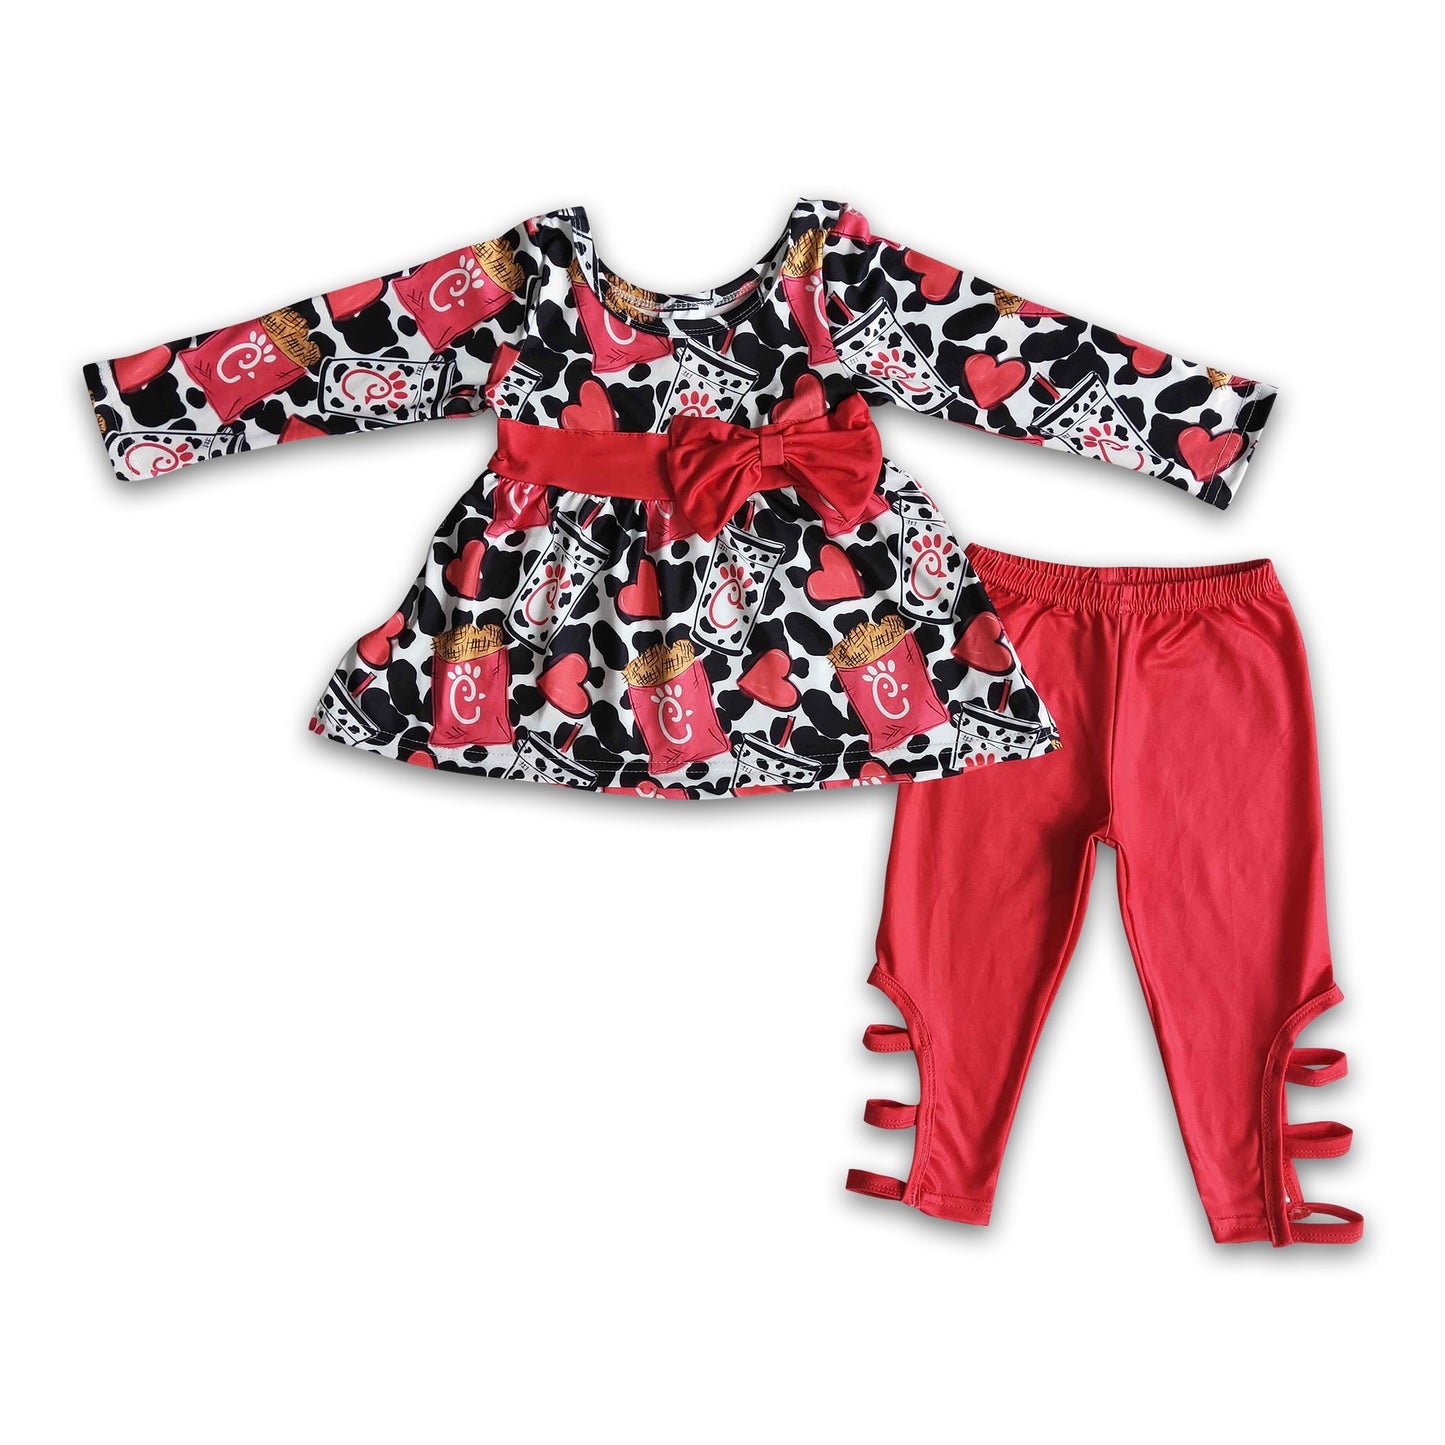 Red bow fries cow tunic criss cross leggings kids girls clothing